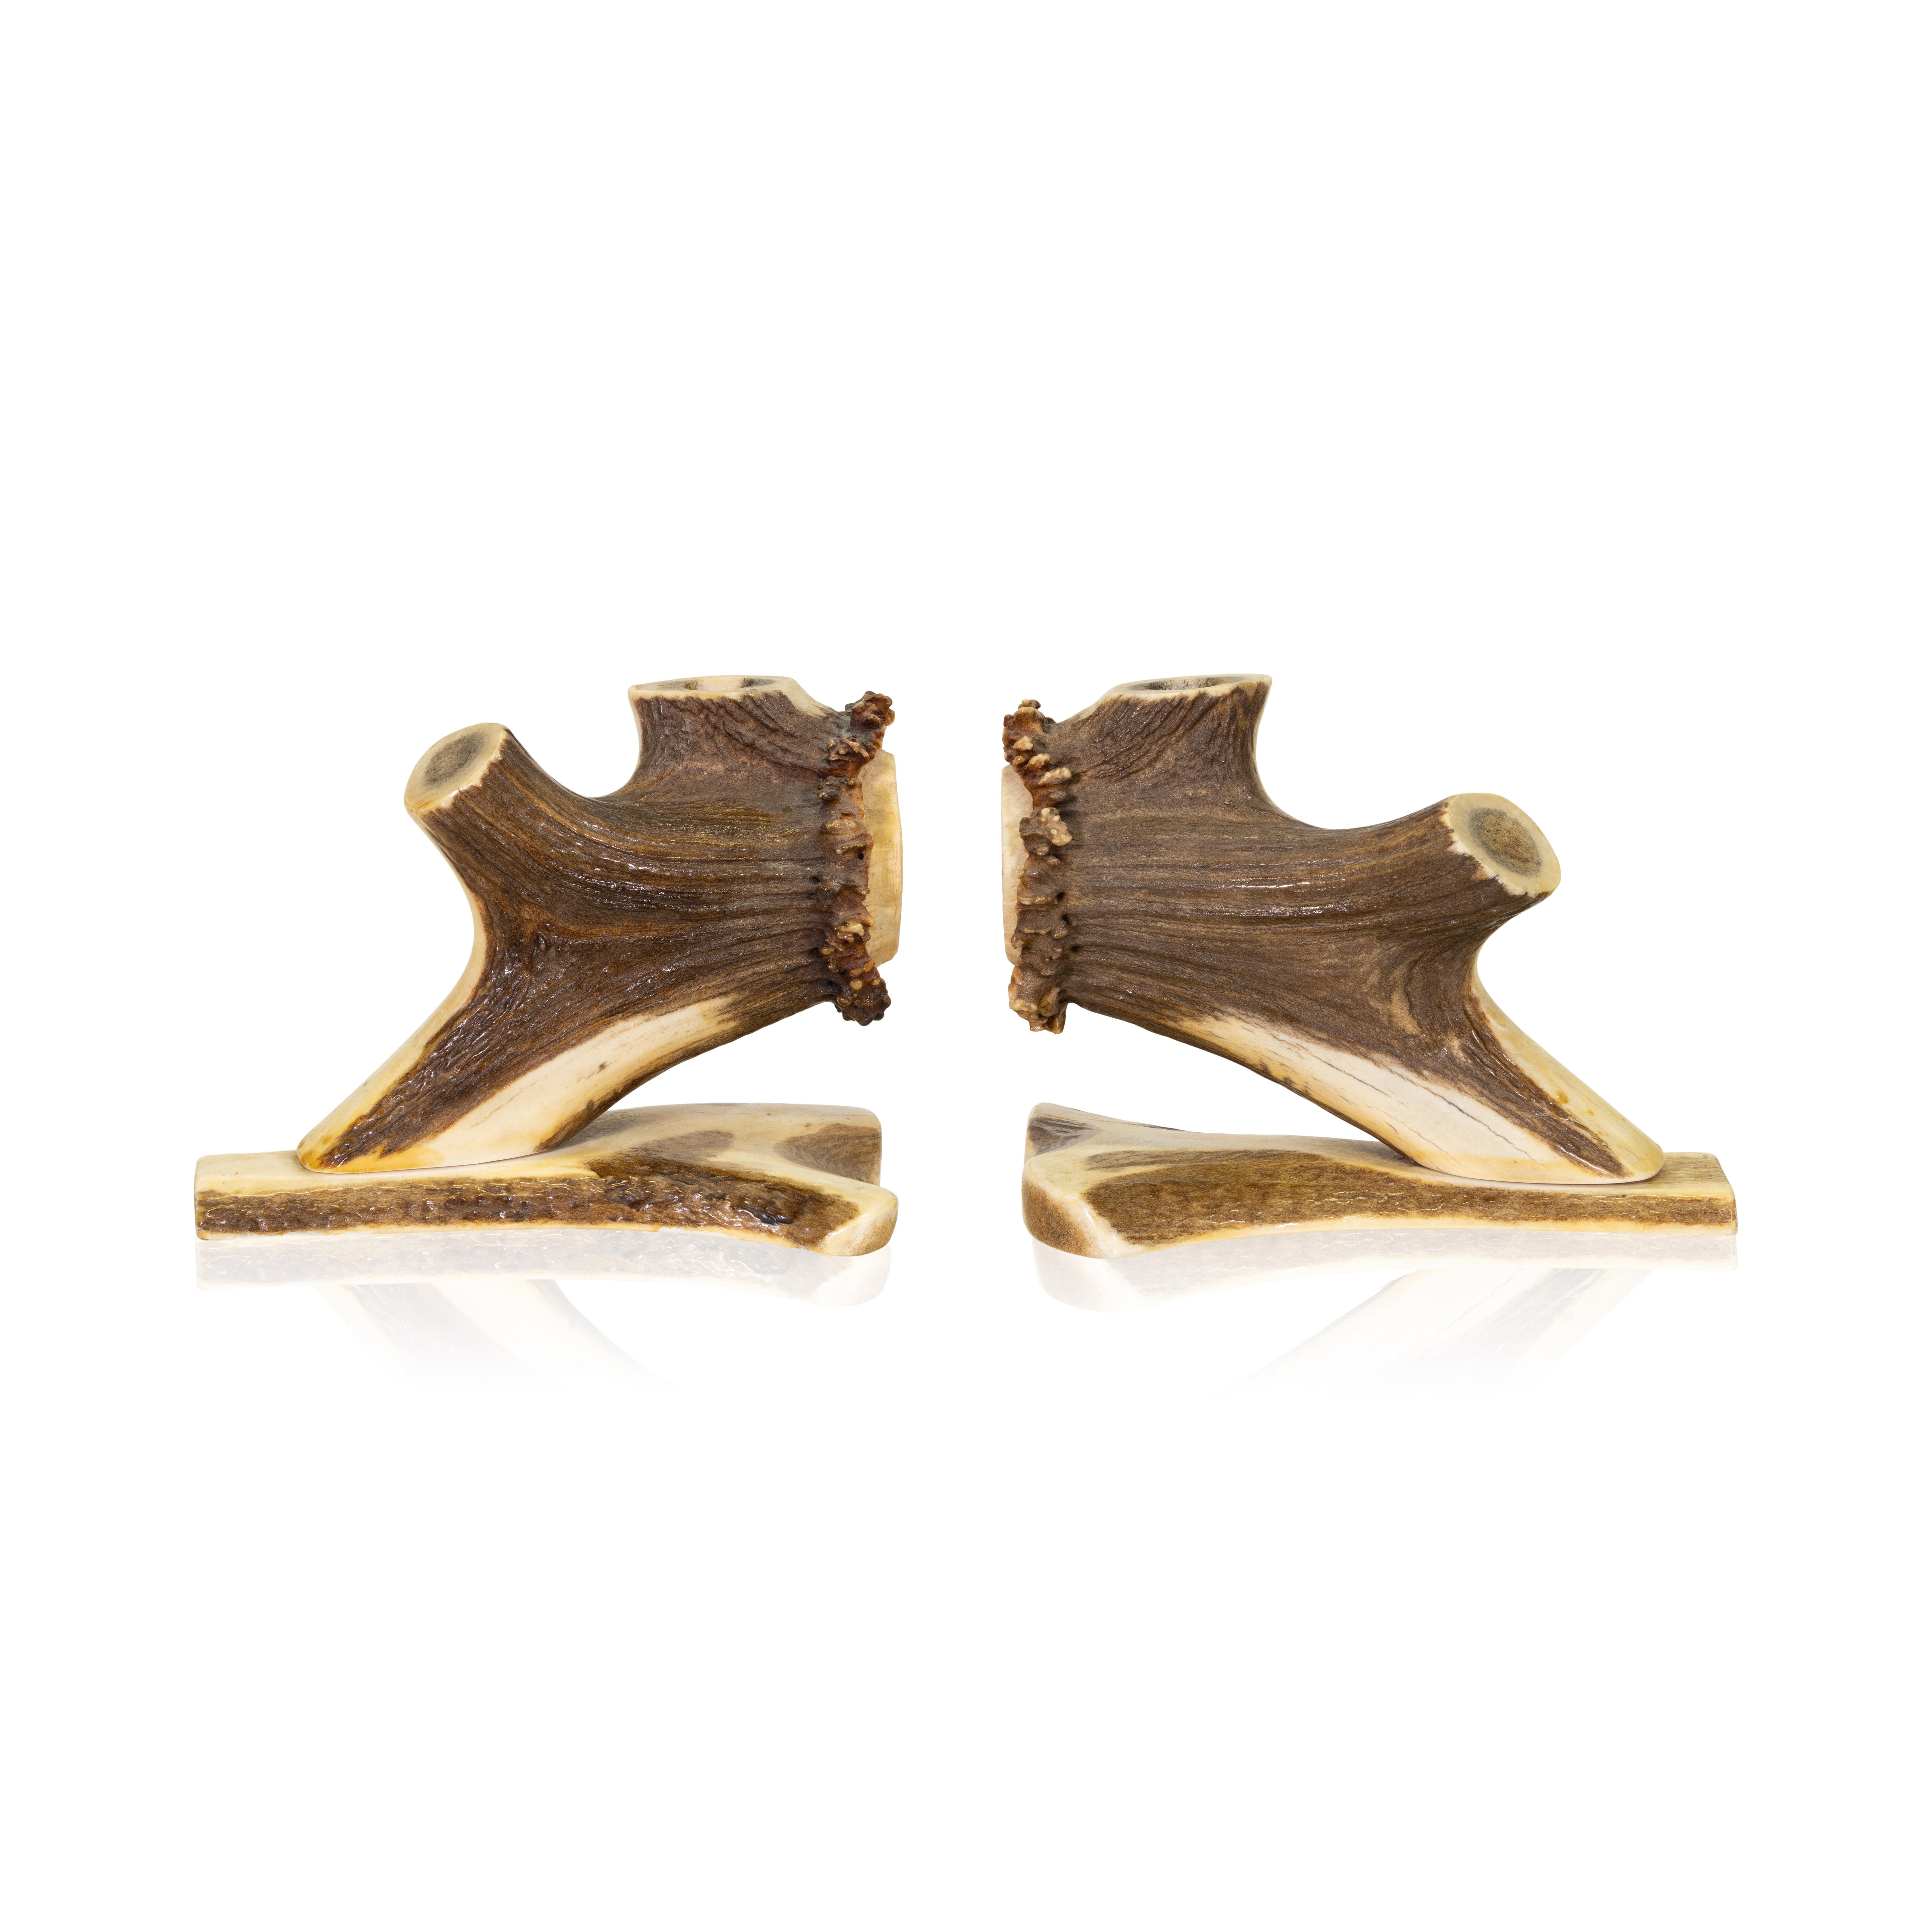 Elk antler bookends or candle holders from British Columbia. Was a massive elk. Goes great with our other antler furniture and accessories. 

Period: first quarter 20th century

Origin: British Columbia

Size: 8